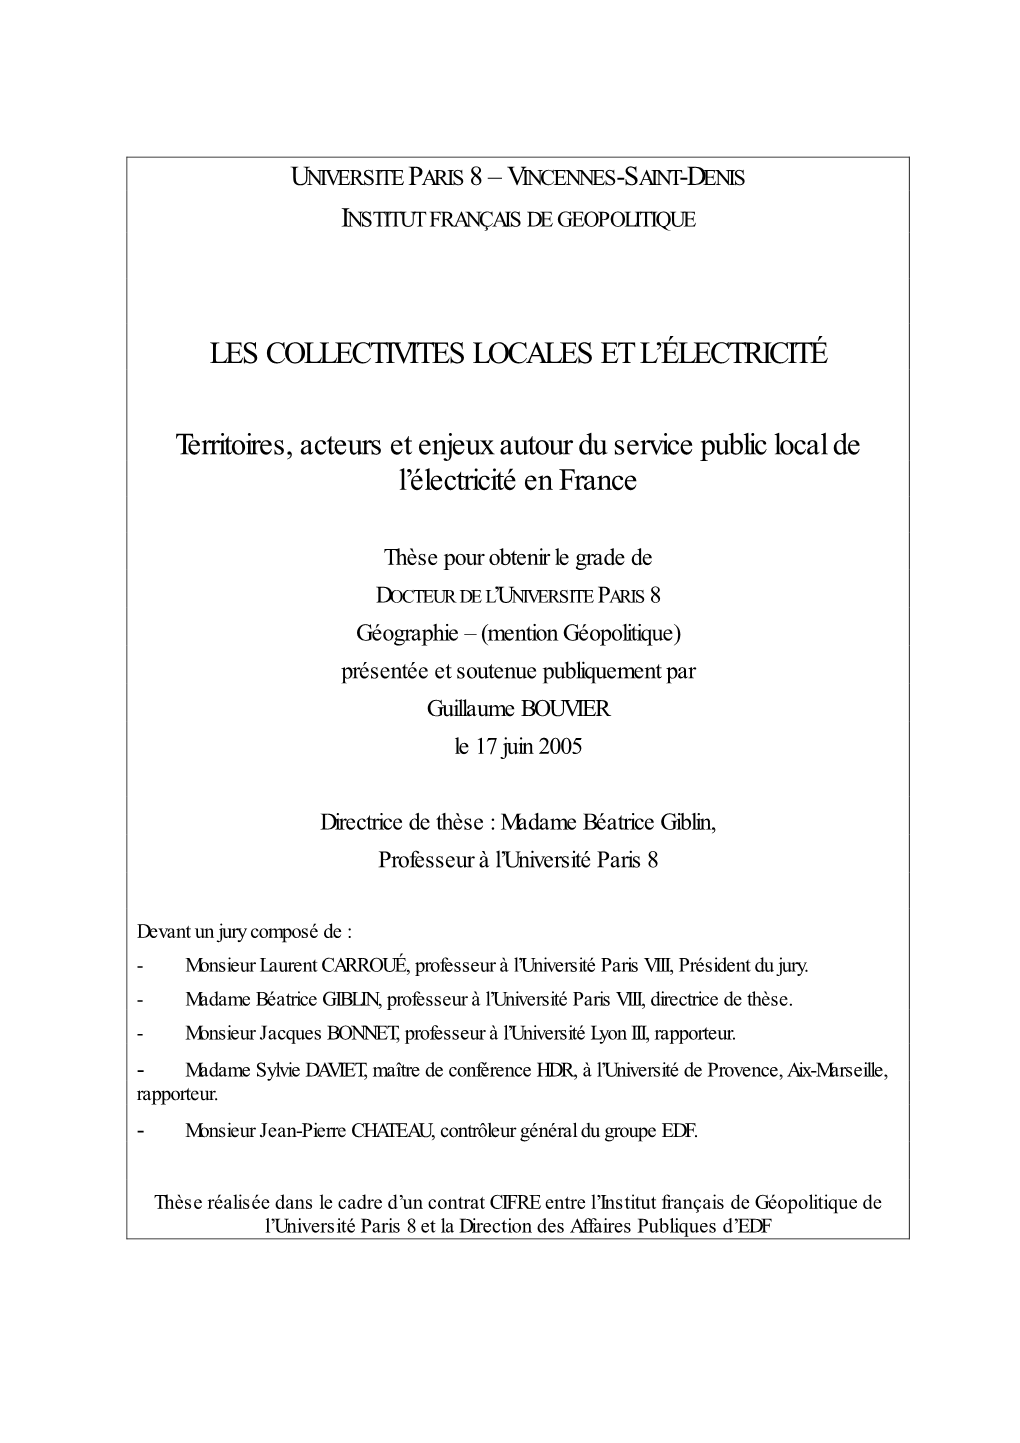 Local Authorities and Electricity: Territories, Actors and Issues Within the Local Public Service in France